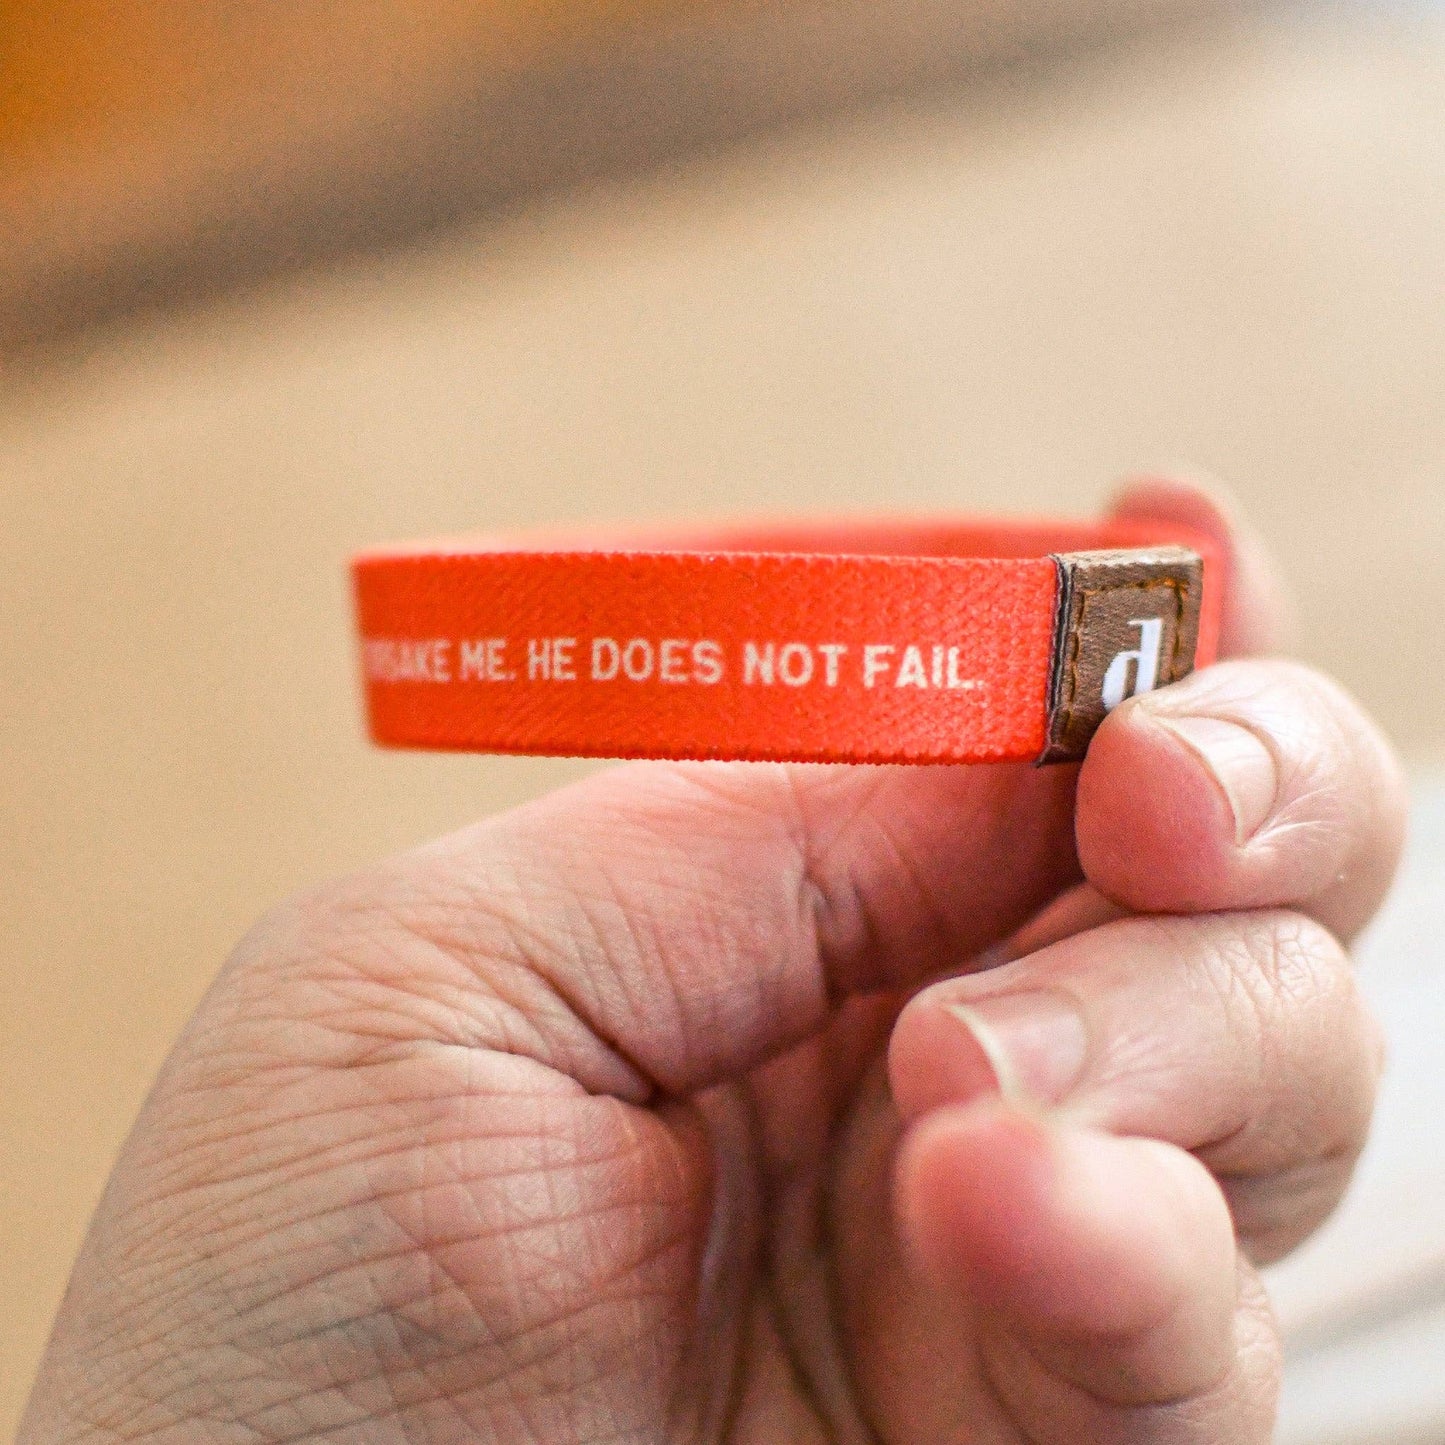 Trusting Is Safe Elastic Wristband